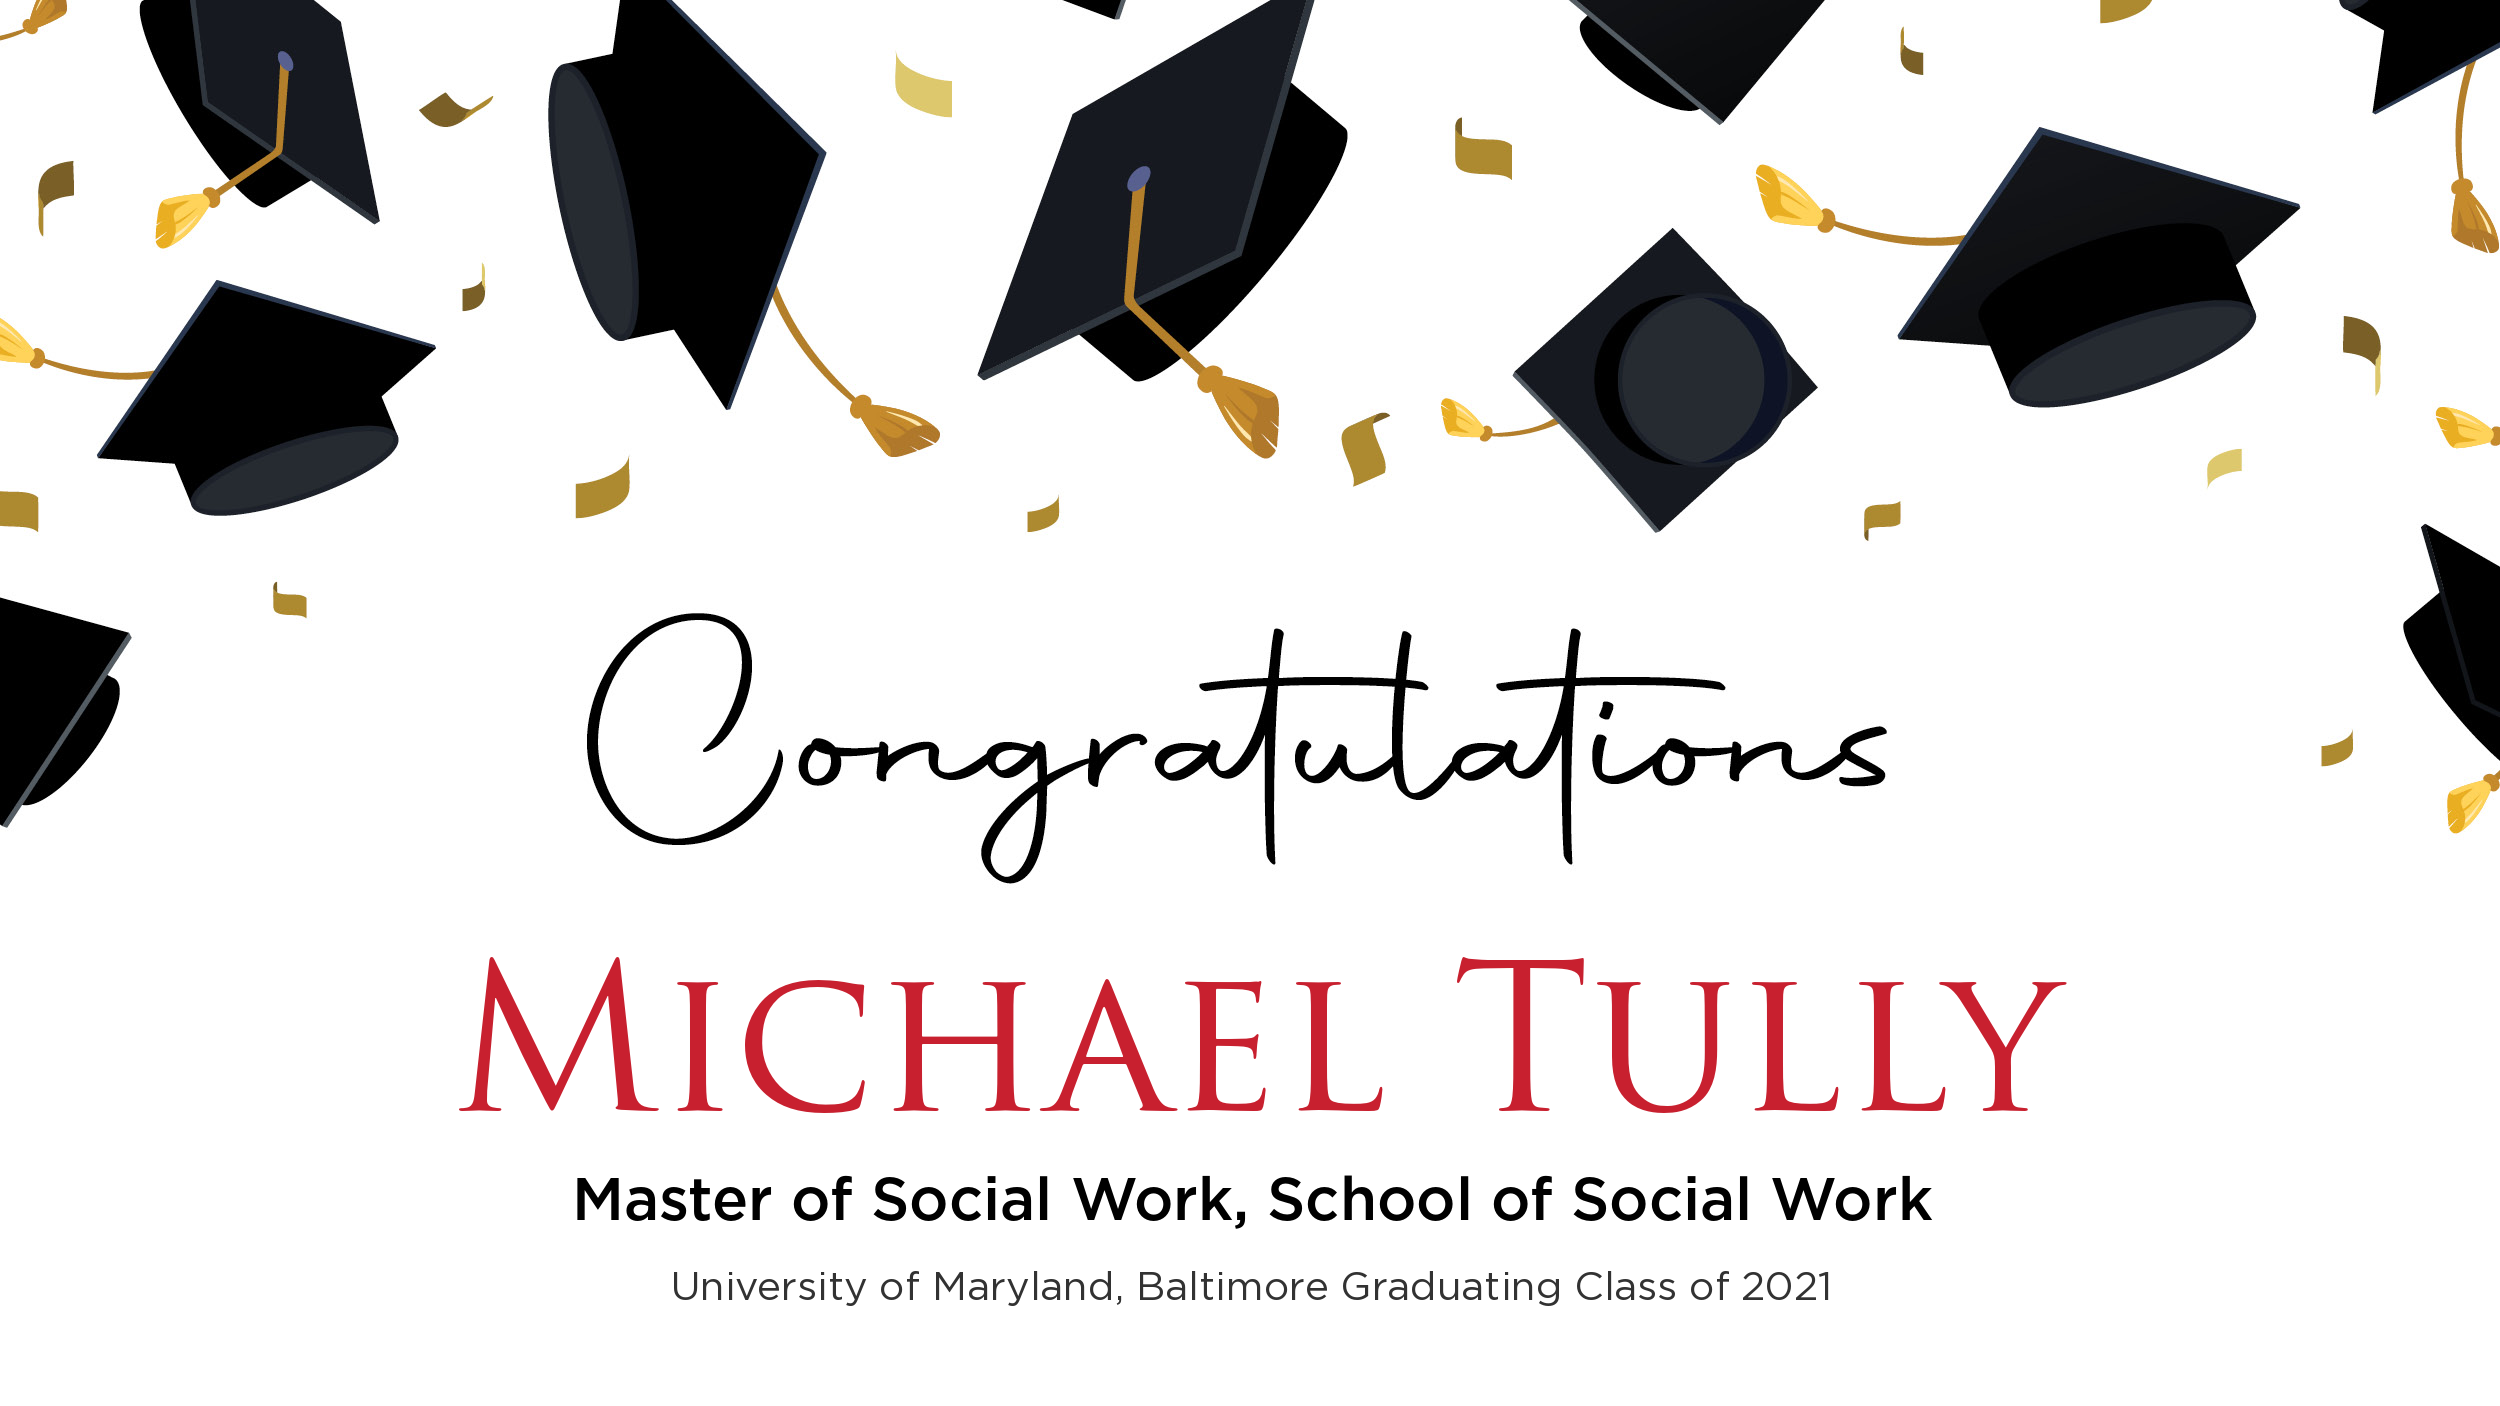 Congratulations Michael Tully, Master of Social Work